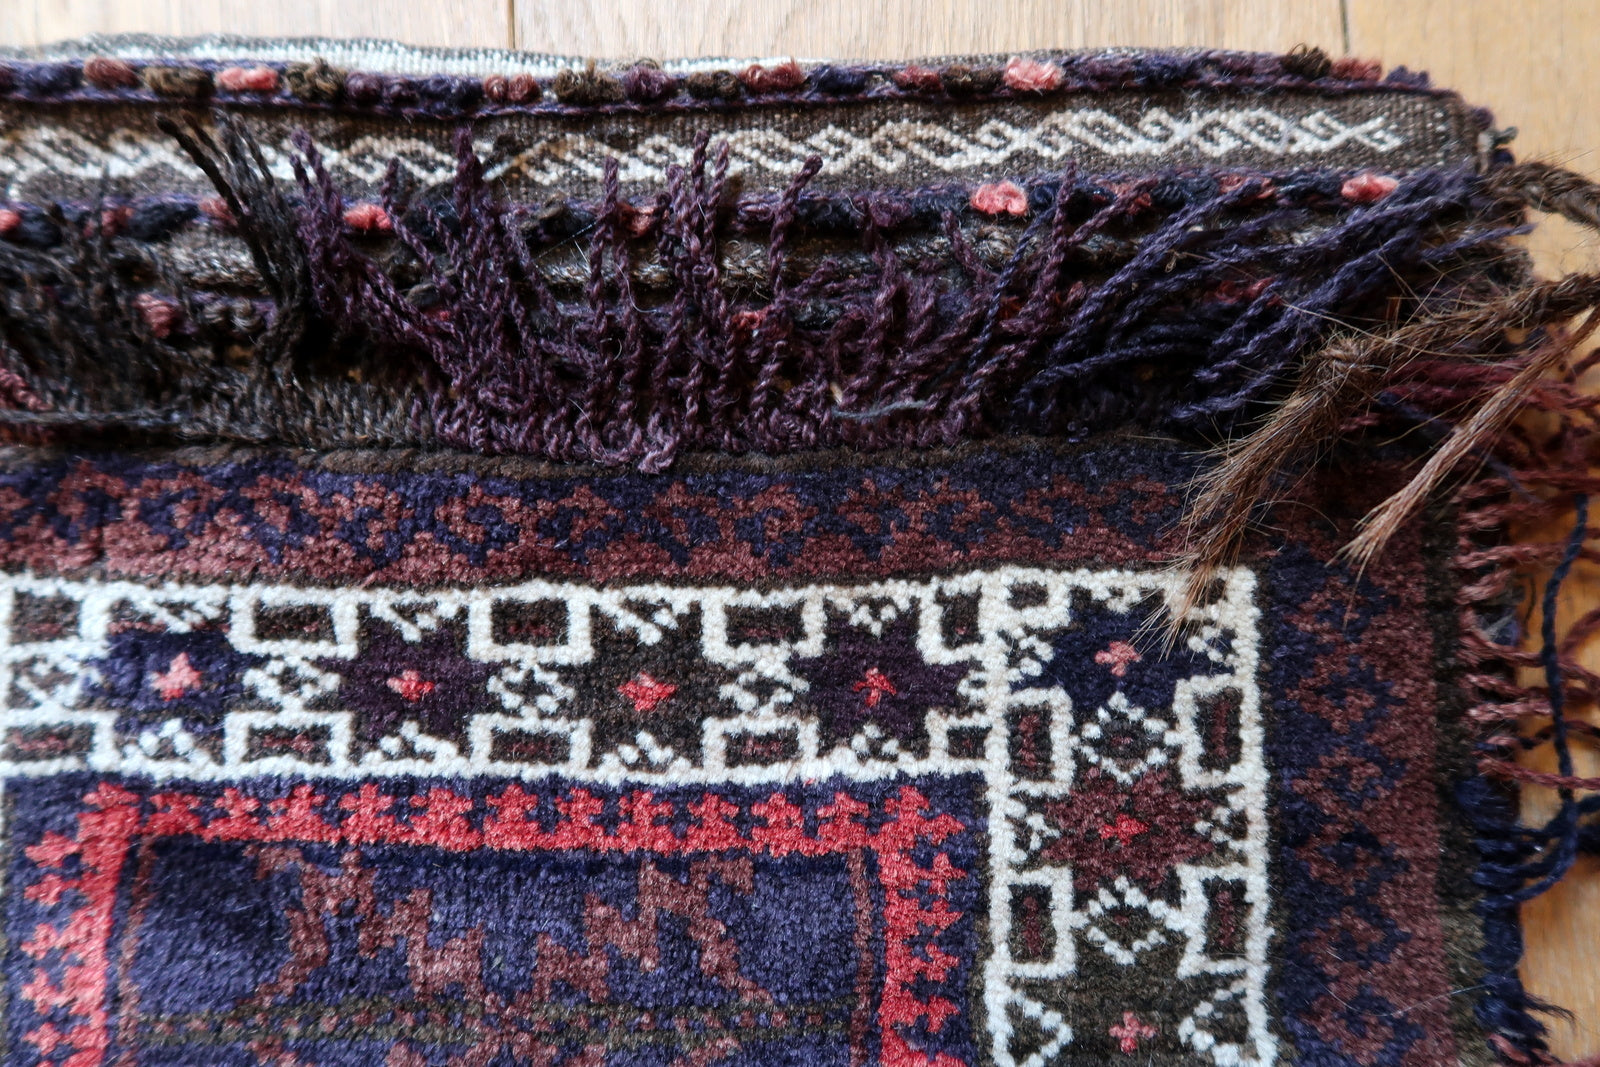 Handmade semi-antique Afghan Baluch salt bag in purple and white colors and stars design. The bag is from the beginning of 20th century in original good condition.